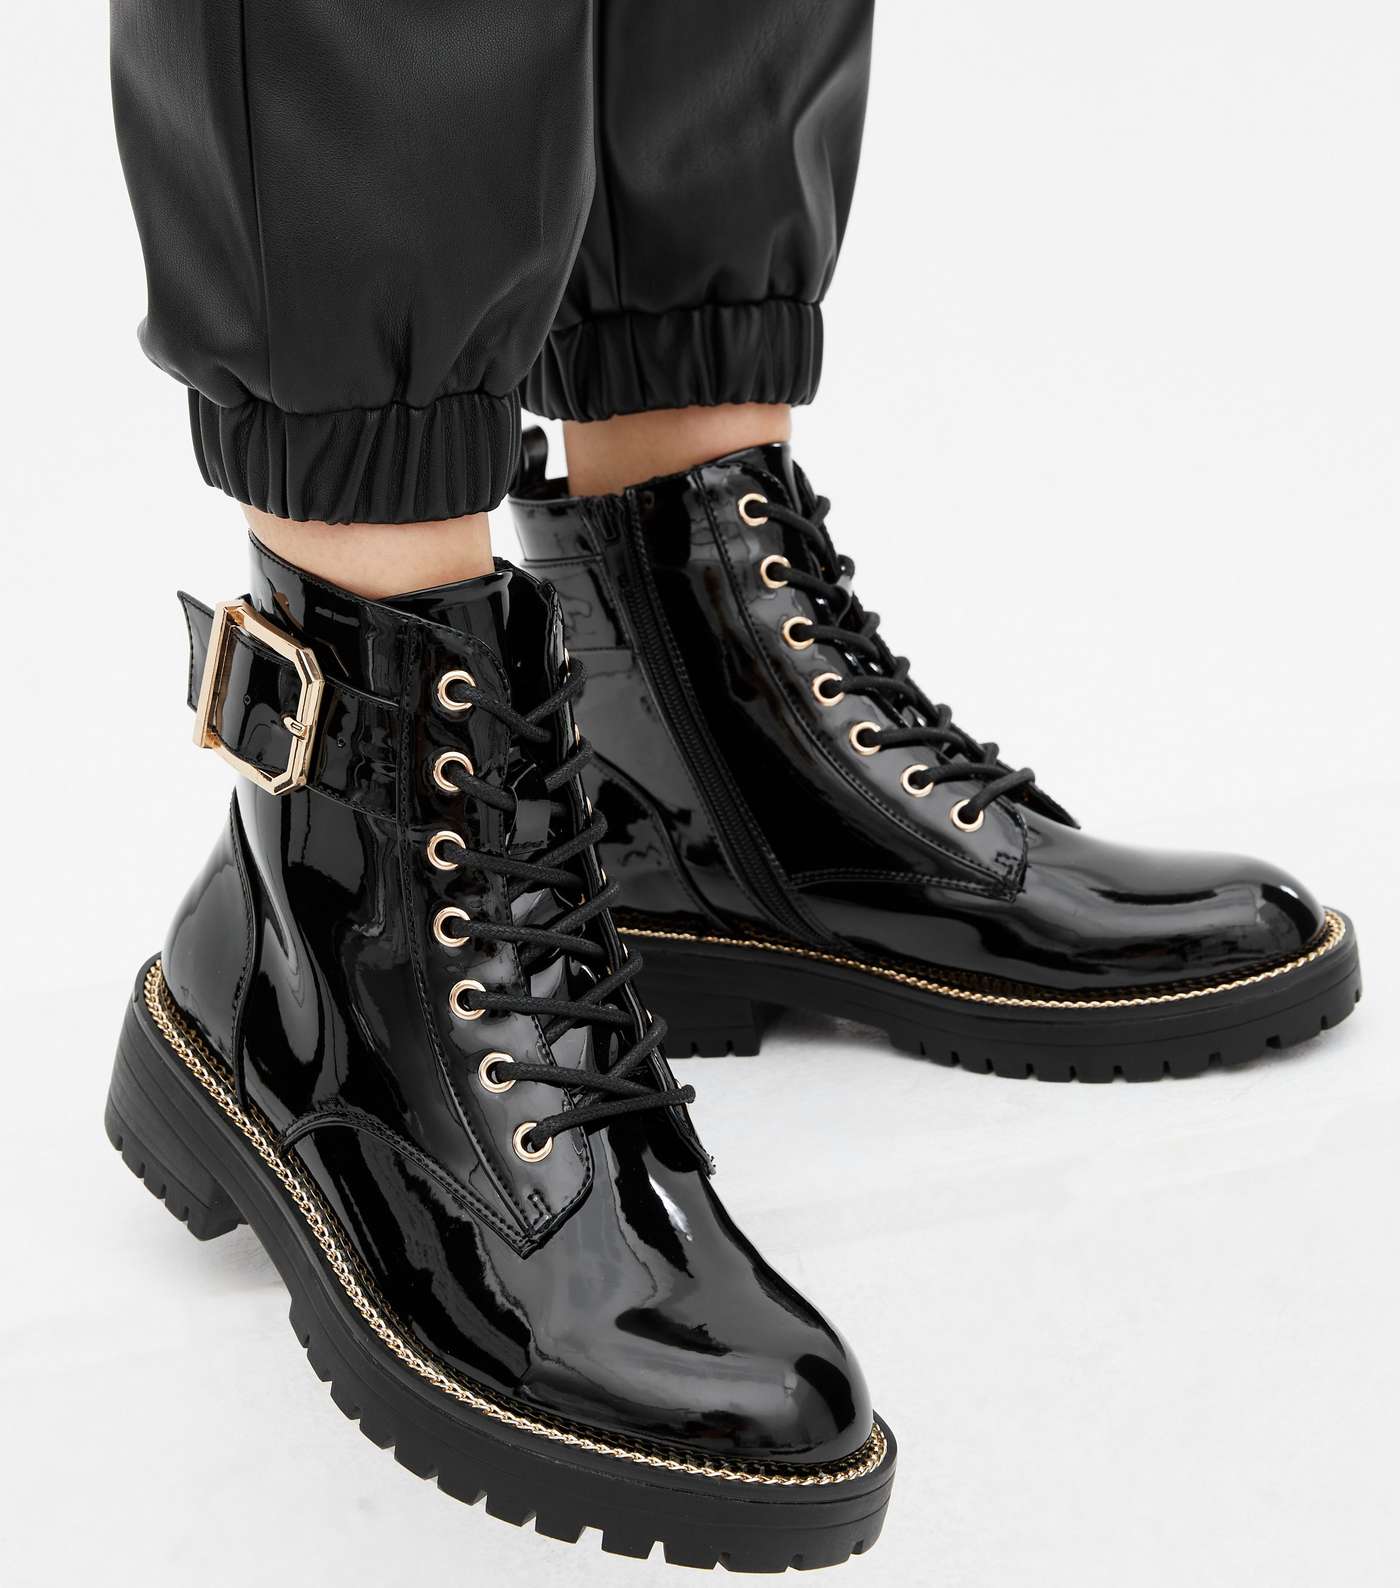 Black Patent Chunky Lace Up Buckle Biker Boots Image 2